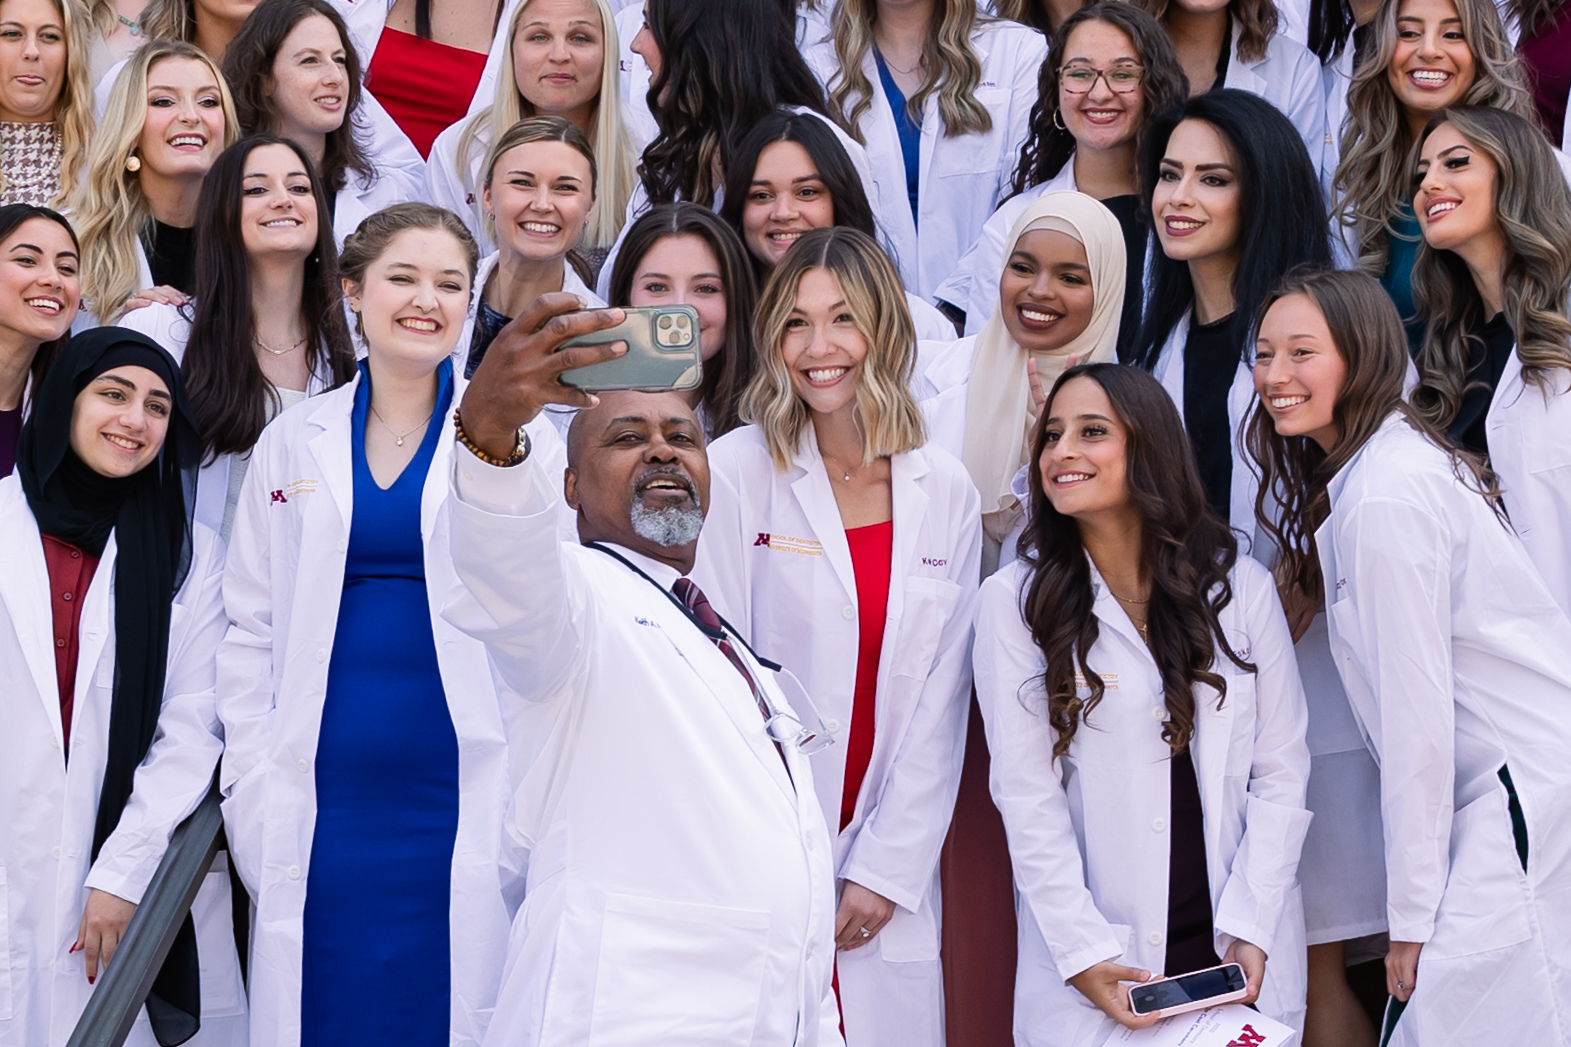 Dean Mays takes a selfie with a group of DDS students in white coats